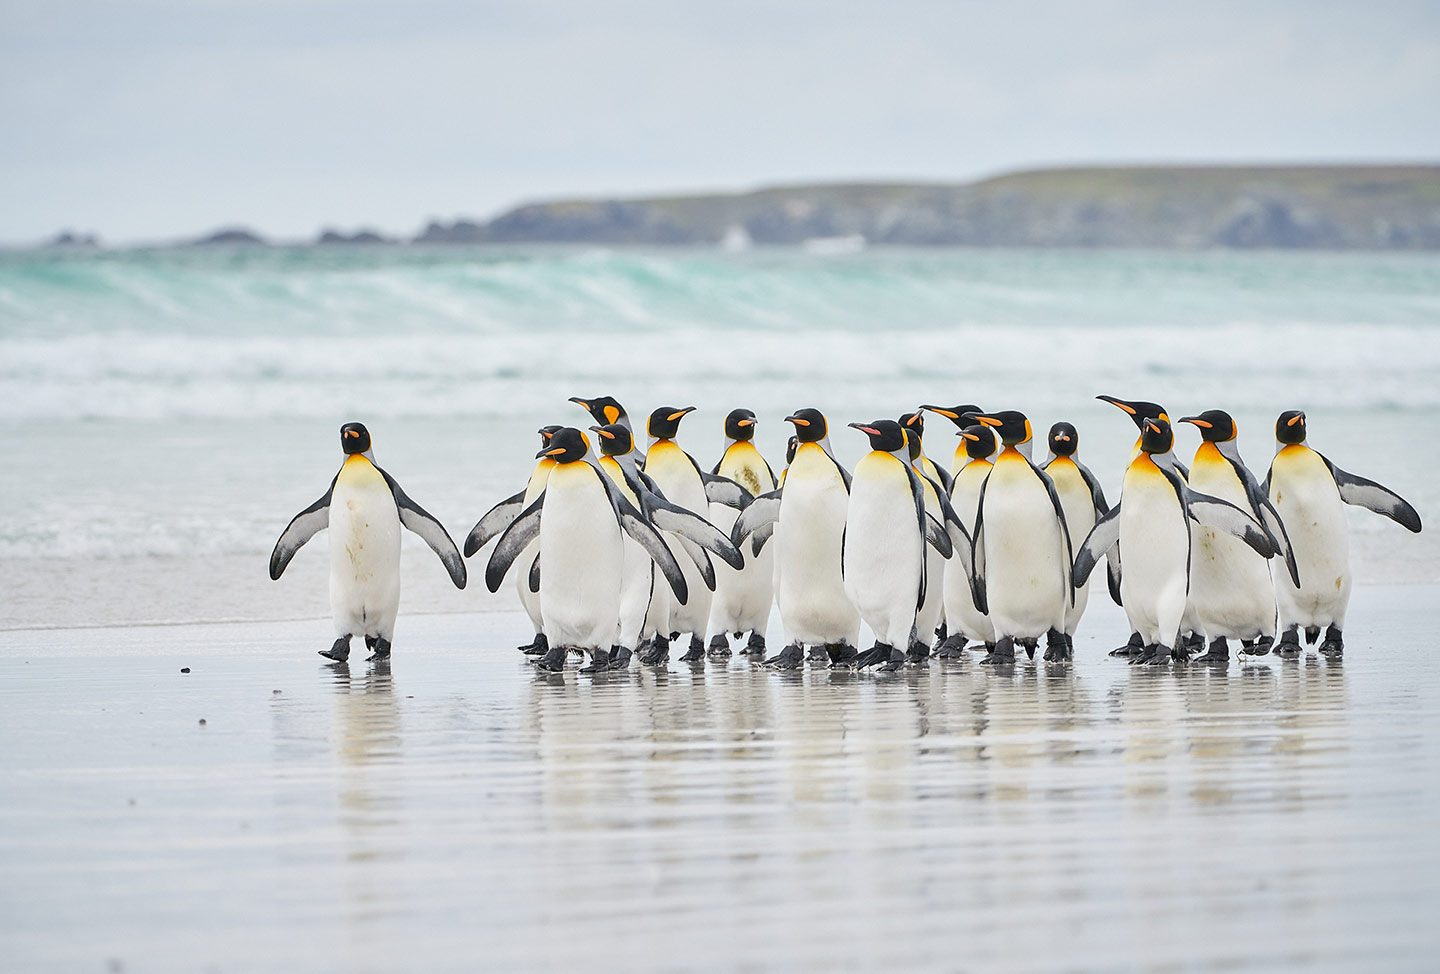 Meet King penguins on a white sand beach in the Falklands, on your Antarctica21 Sea Voyages to the Sub-Antarctic regions